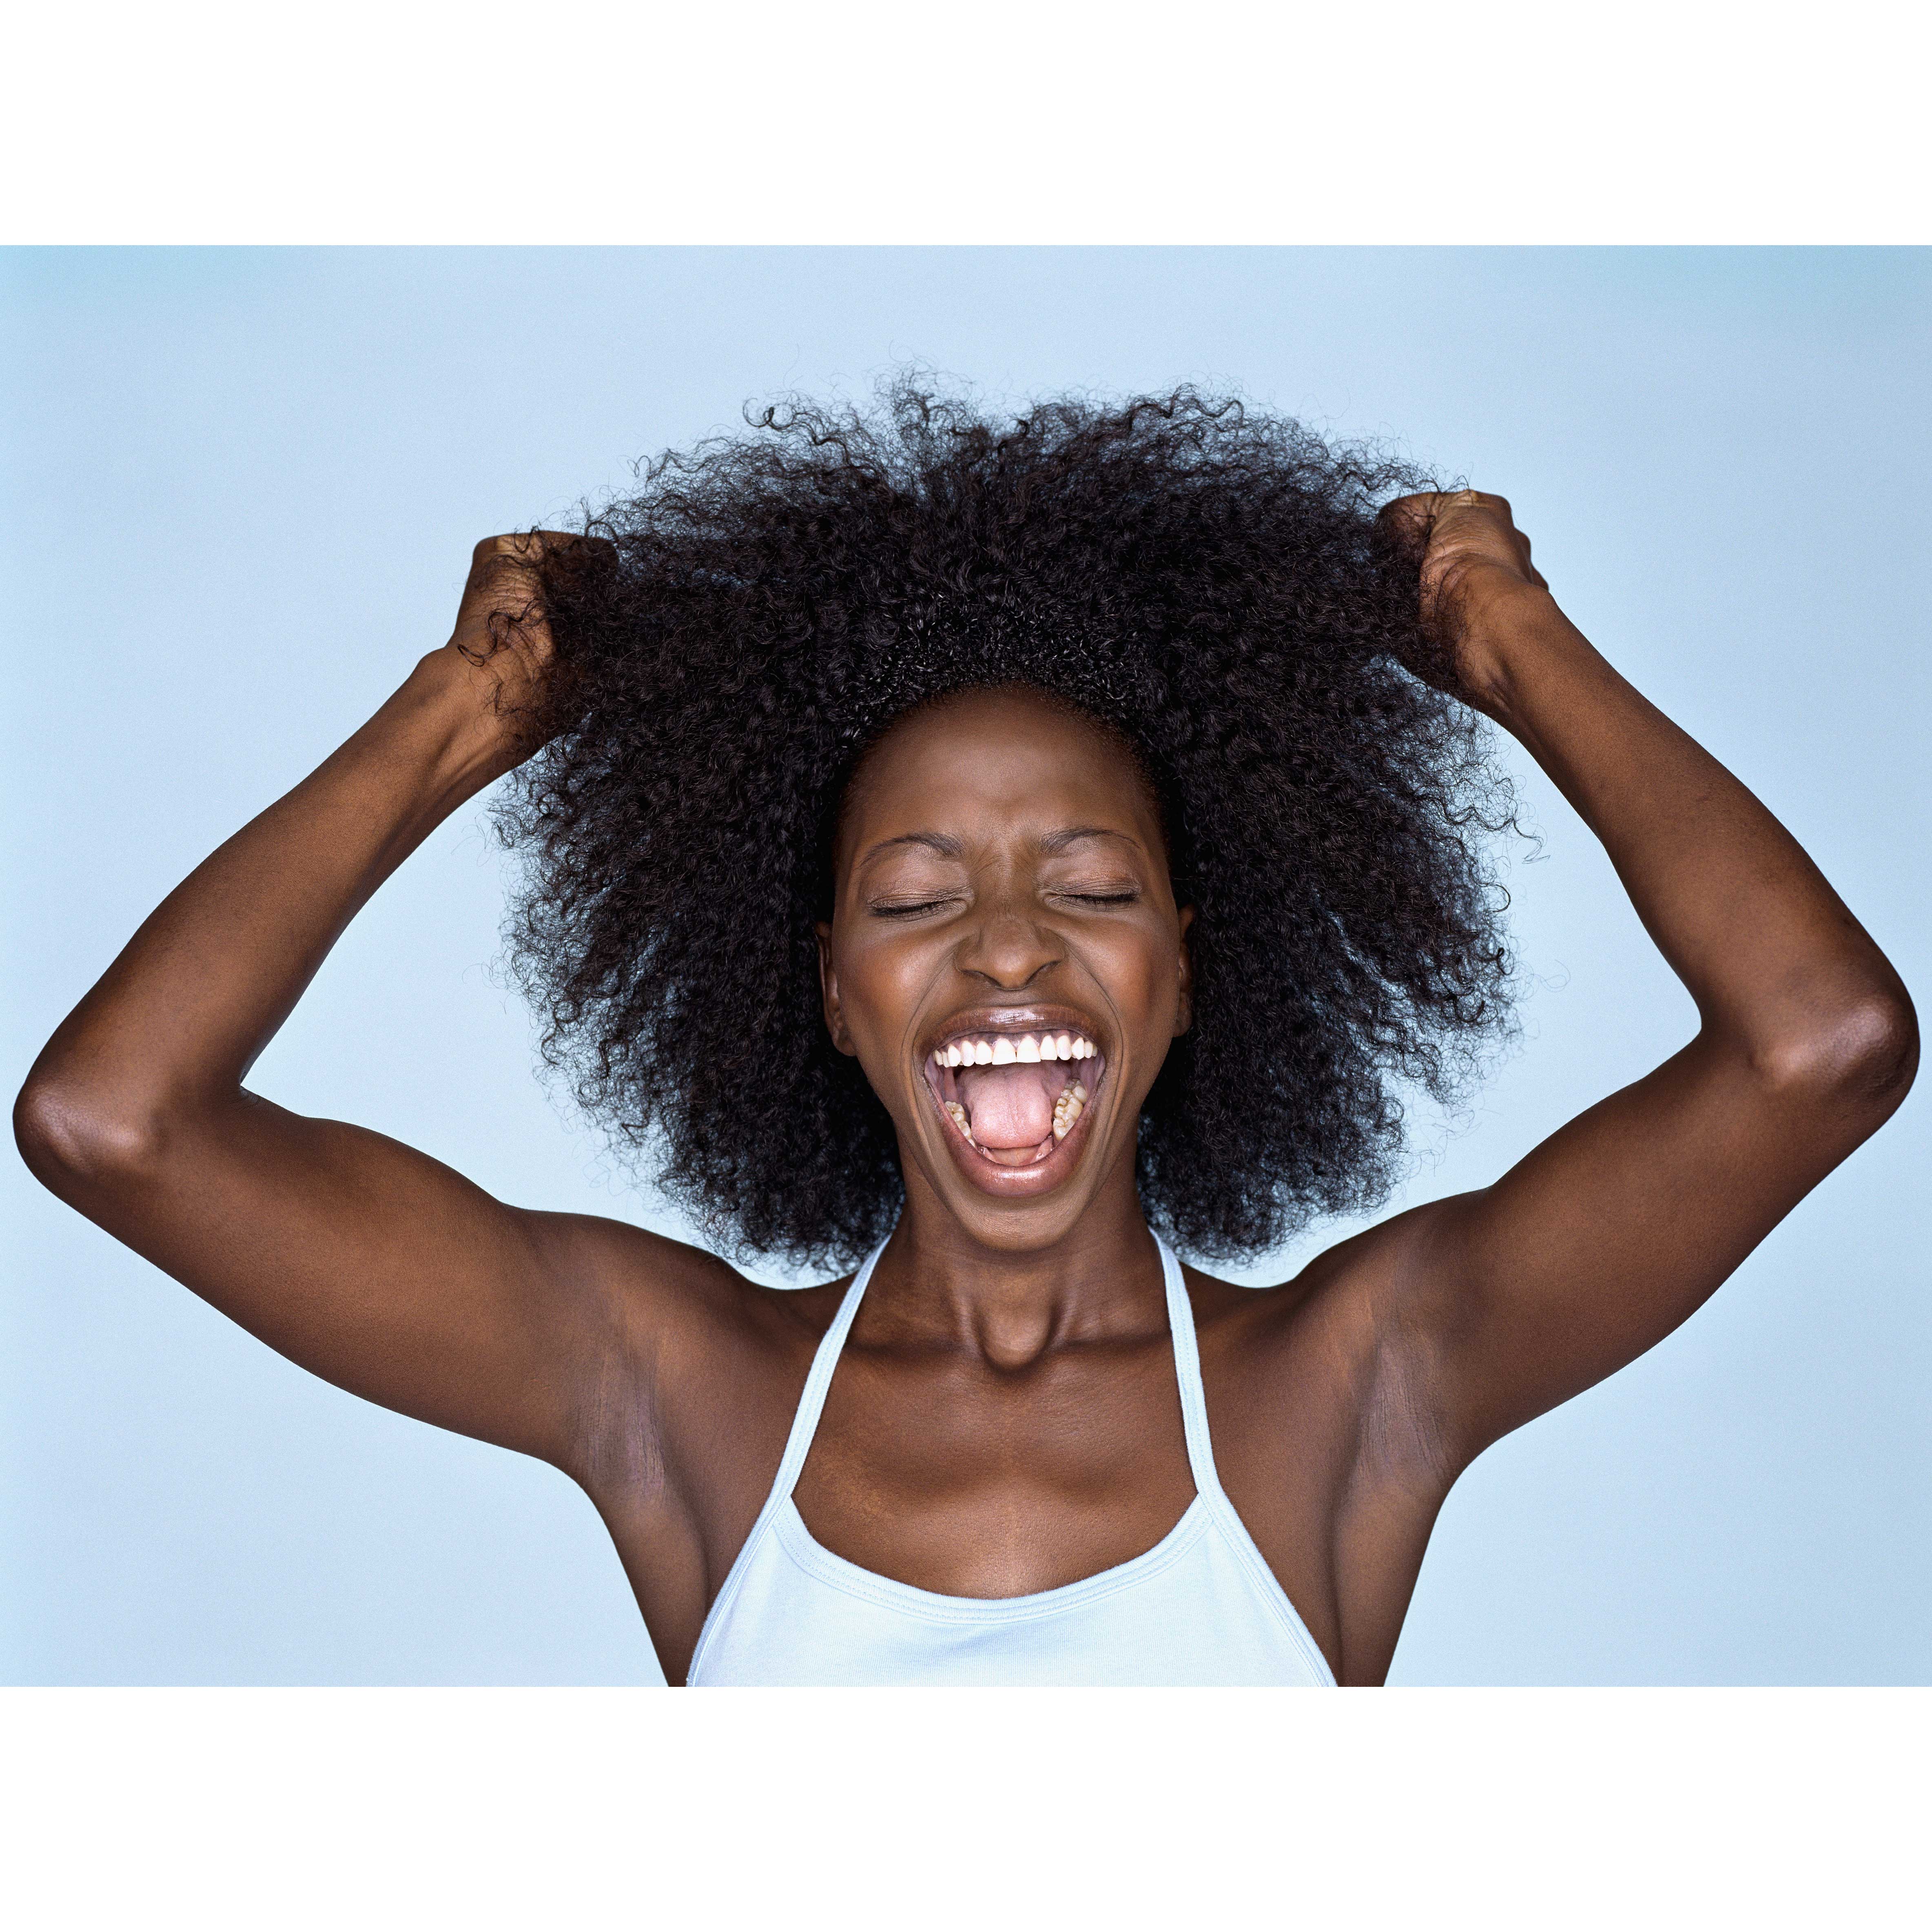 We Hear You! The 10 Biggest Complaints from Single Black Women
